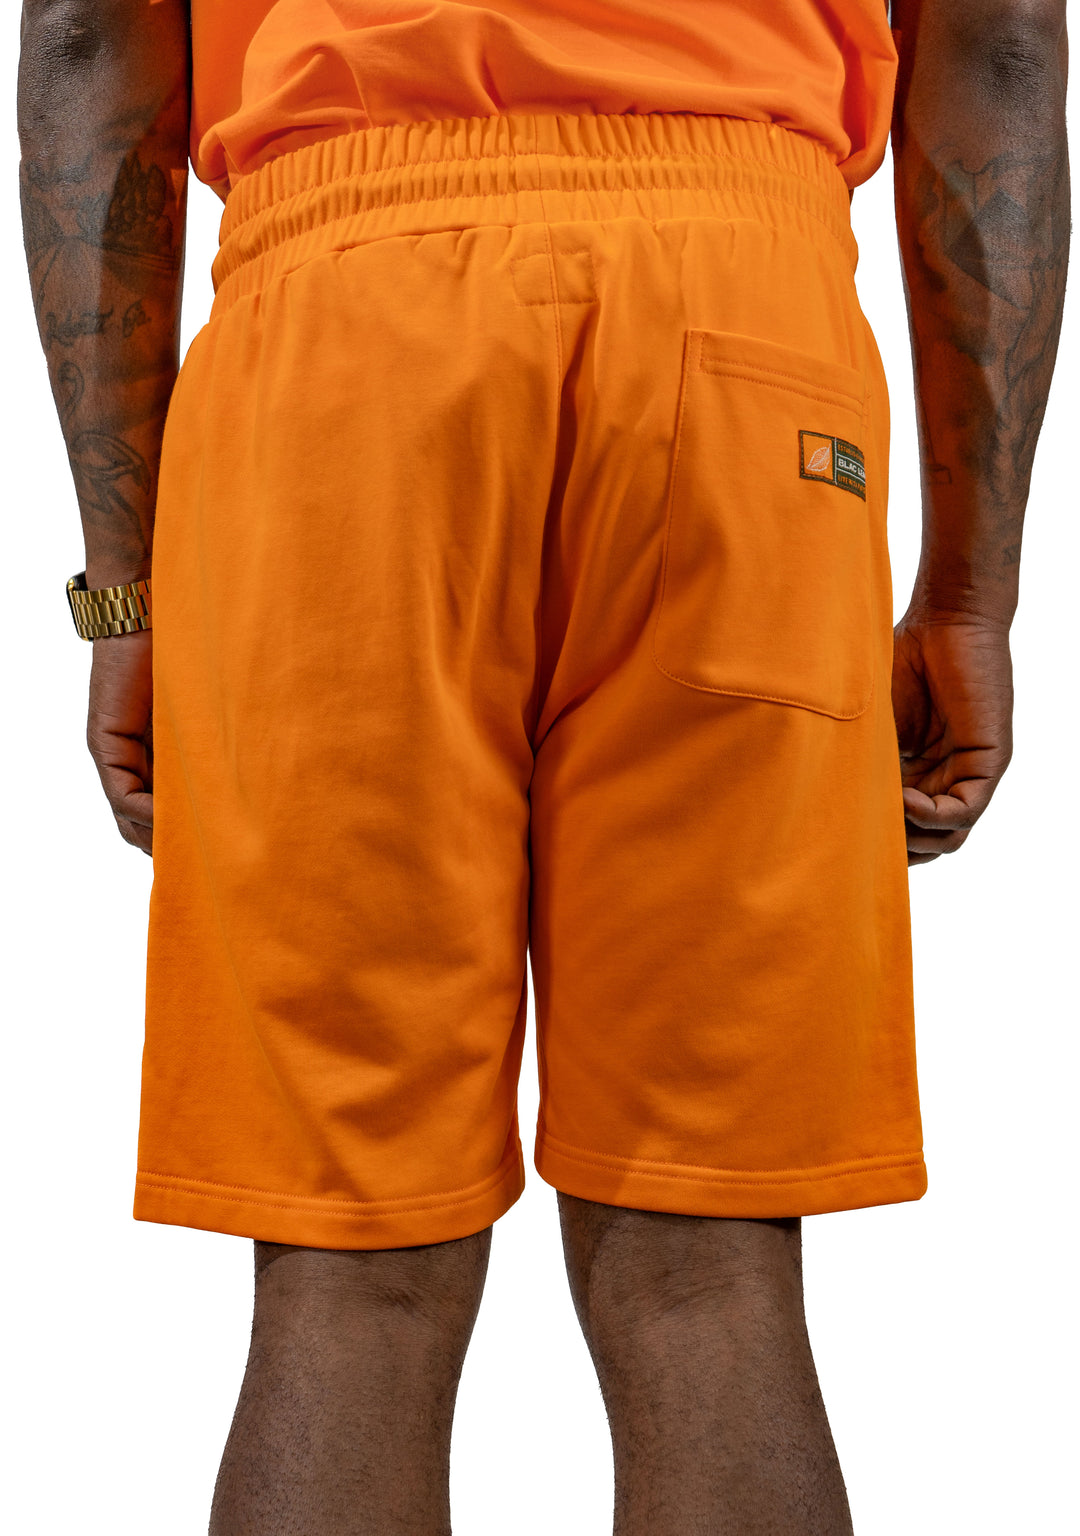 Live With Purpose Essential Orange Embroidered Shorts